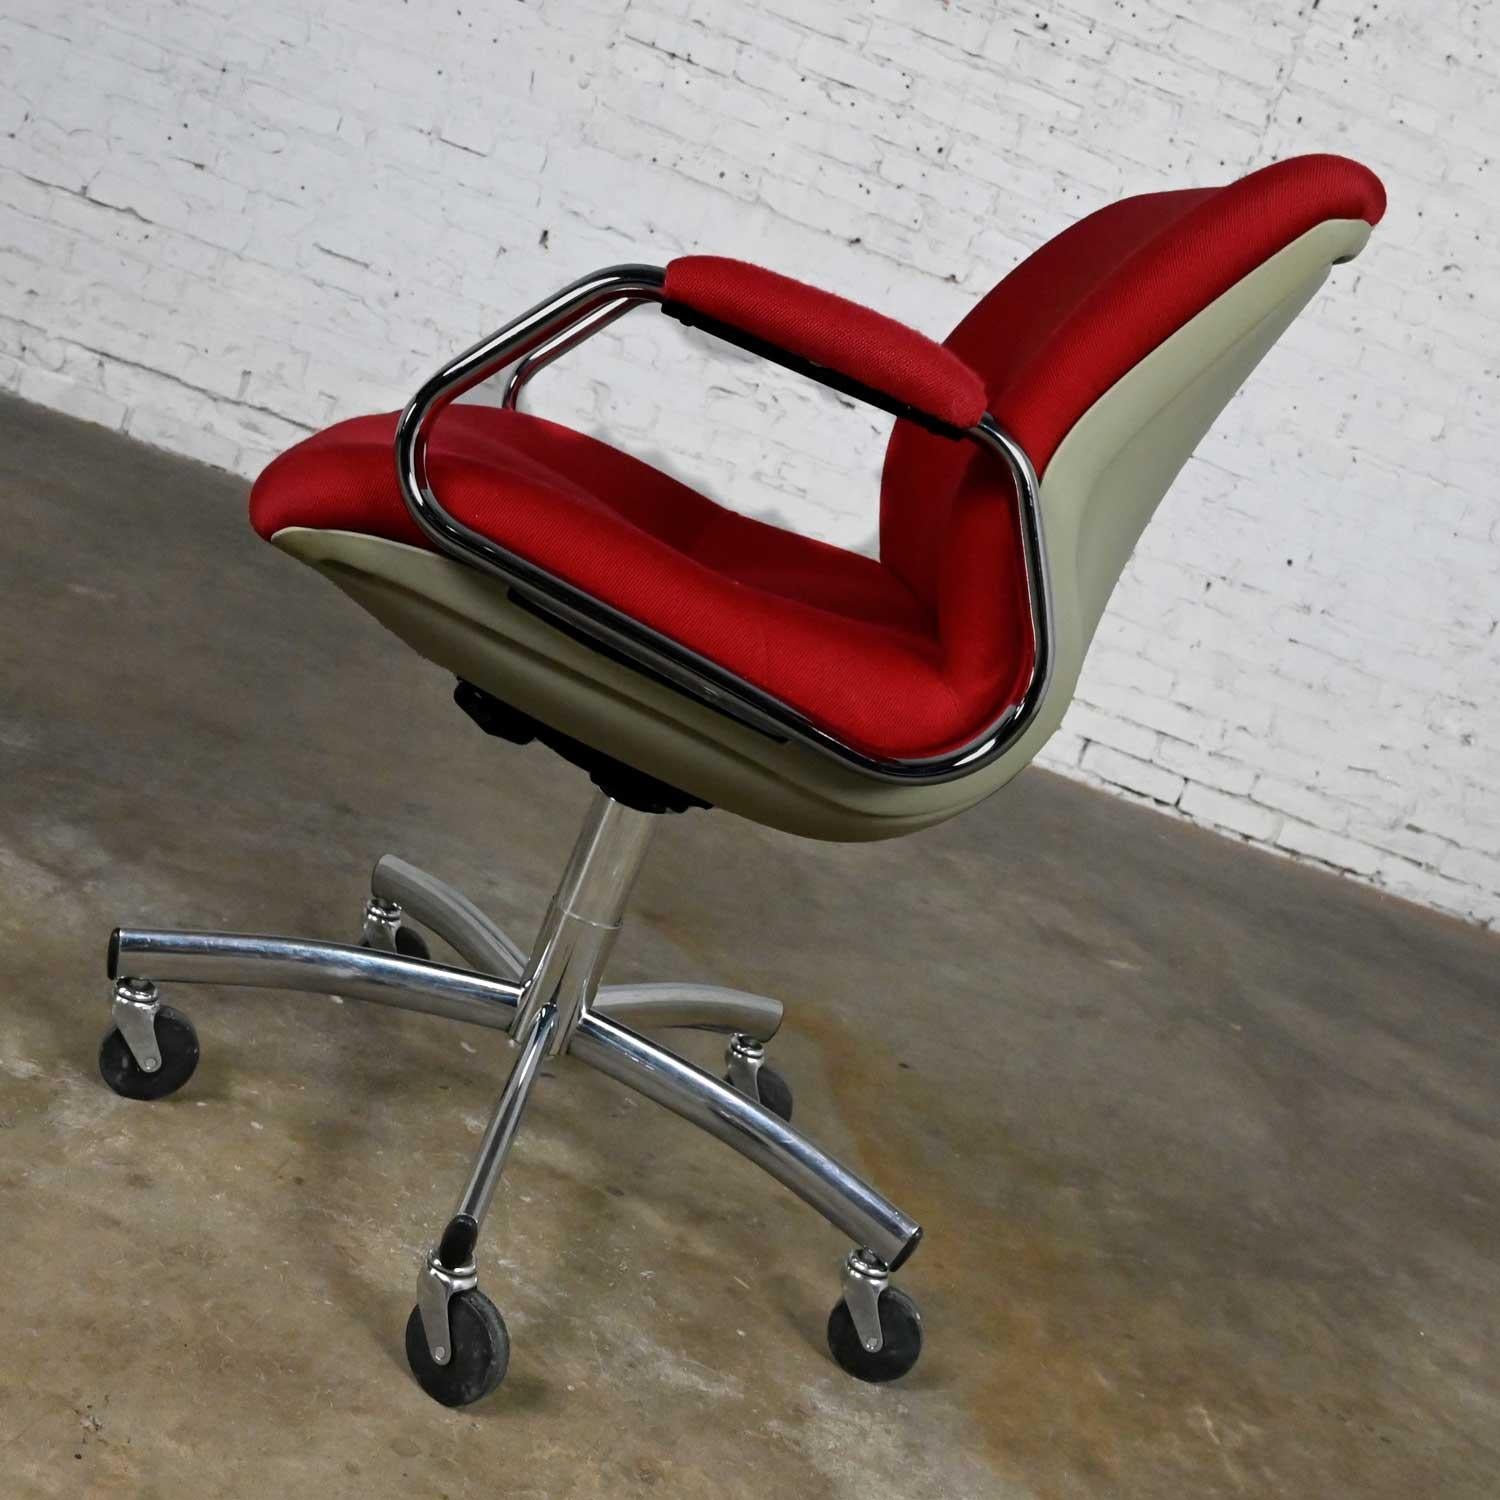 20th Century Modern Steelcase Chrome & Red Swivel Rolling Chair #454 Style Charles Pollock For Sale